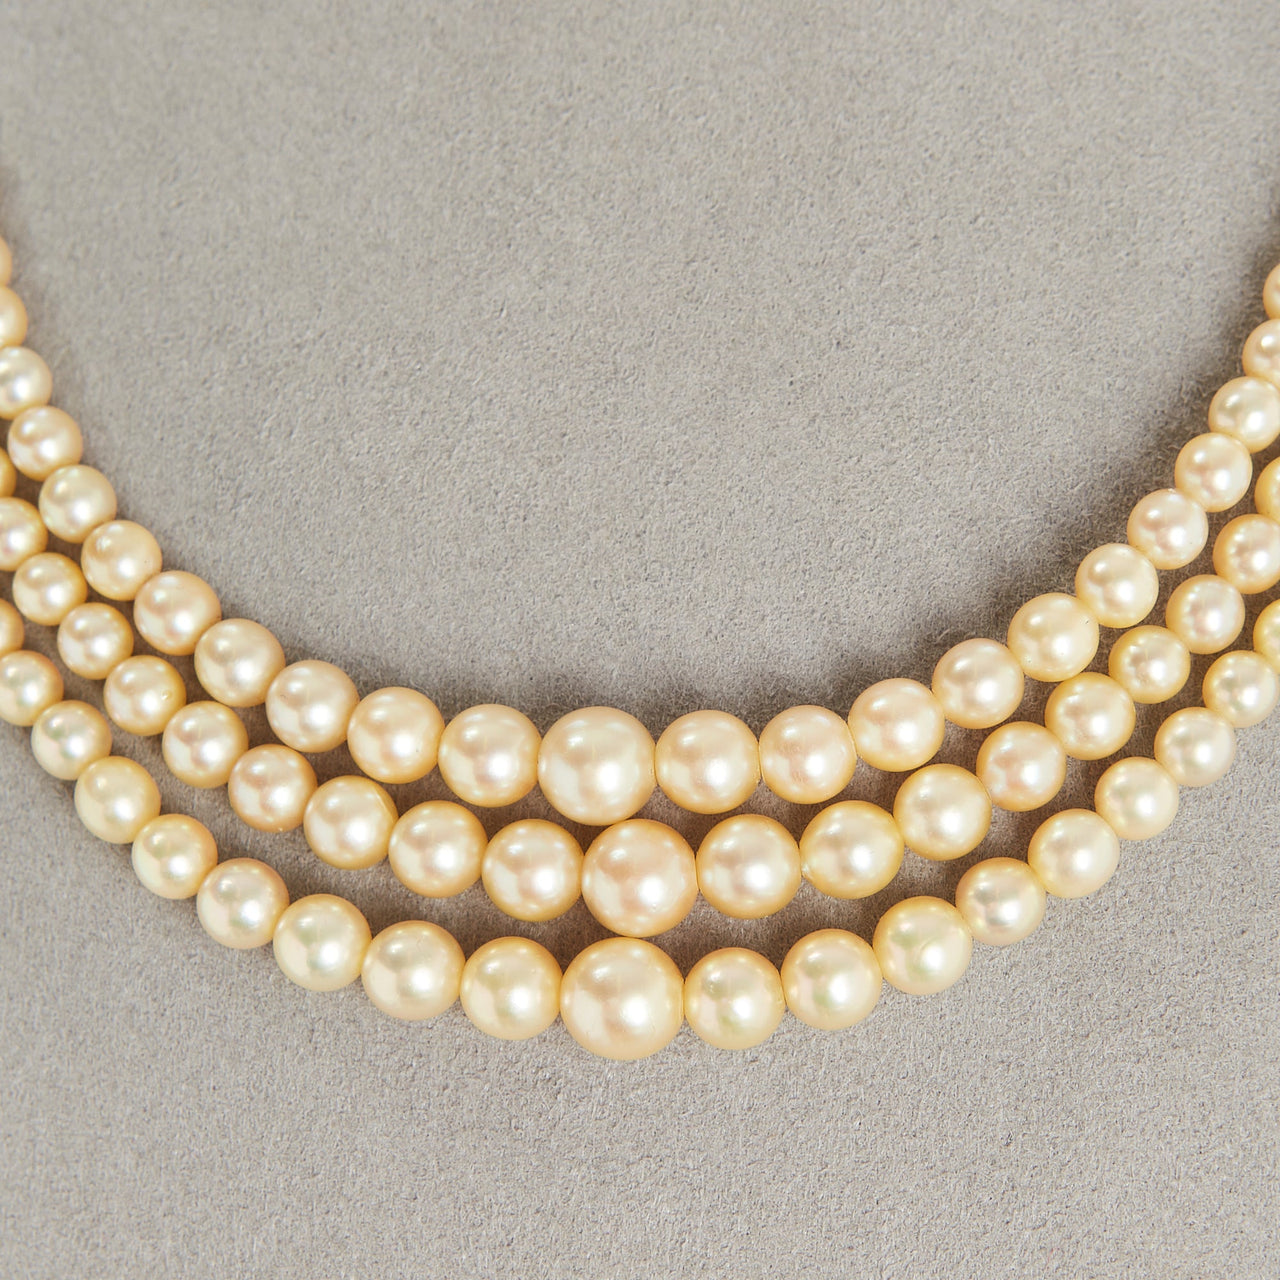 Three Strand Pearl Necklace - The Pearl Girls | Cultured Pearls | Pearl Shop